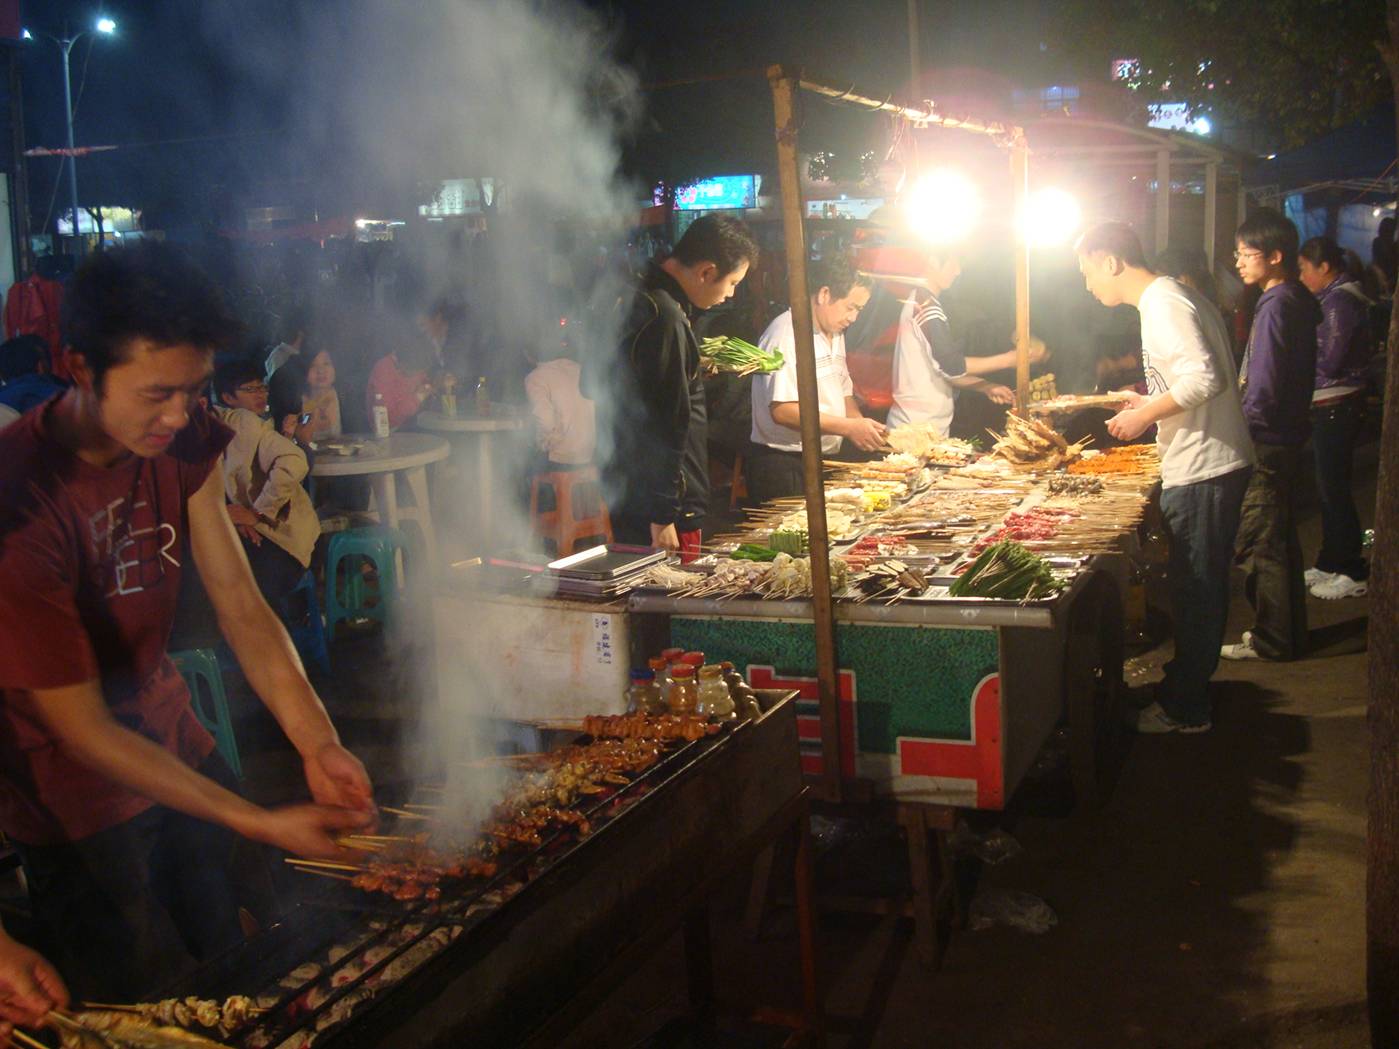 Picture: The food preparation for the street barbeque in Shitang Cun, Wuxi, China